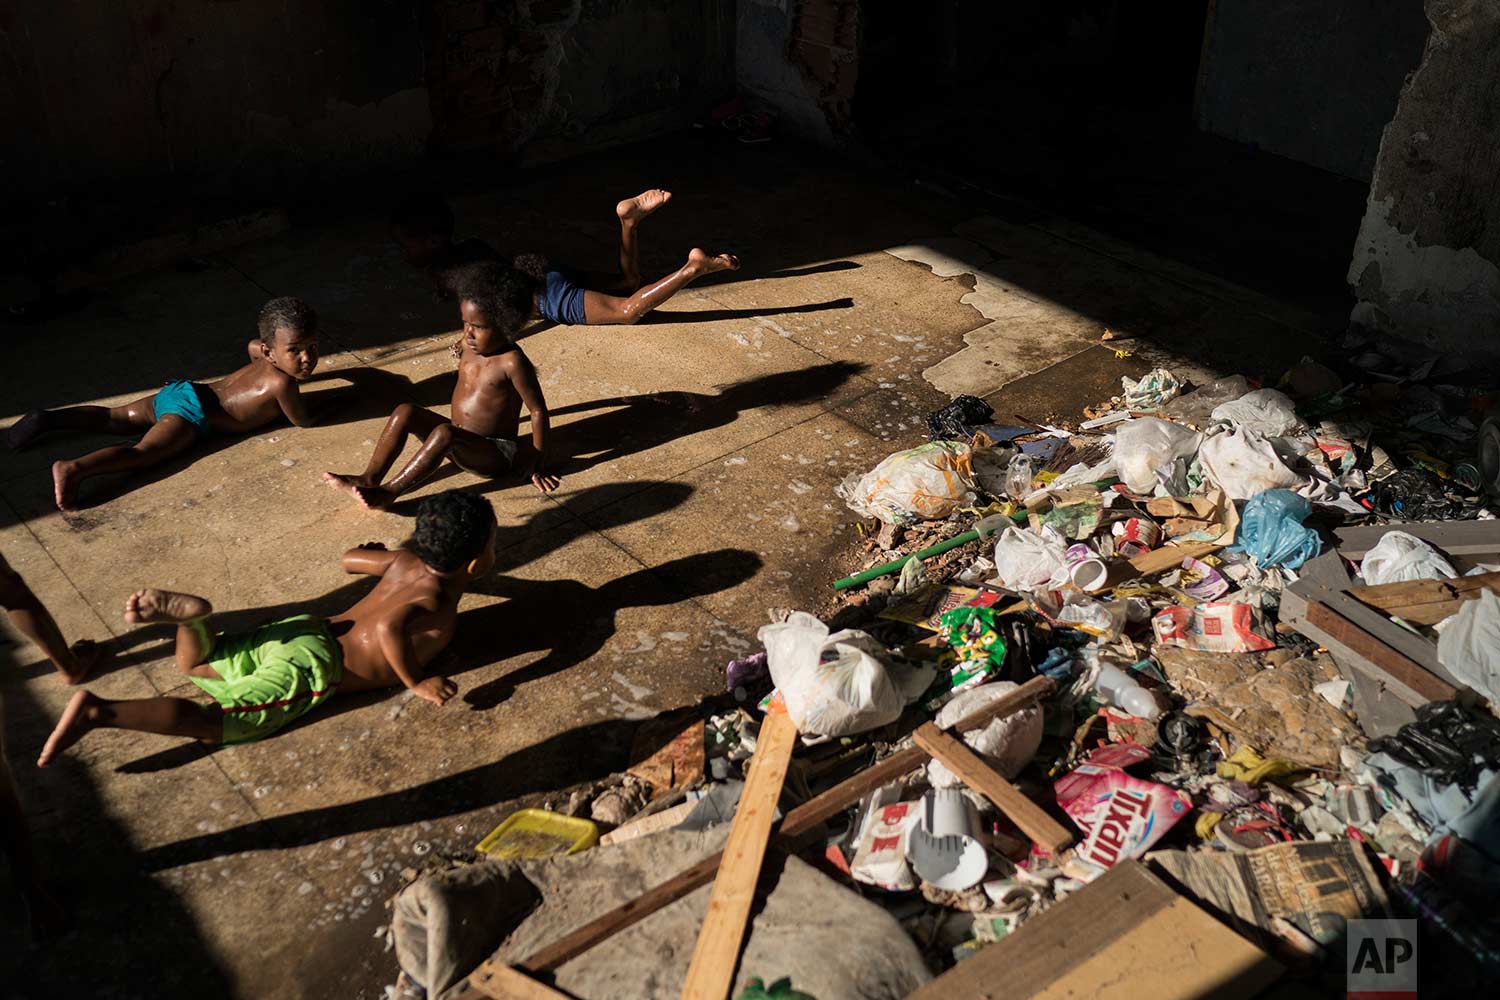  In this Sept. 10, 2017 photo, children slide on a puddle near trash as they play in a squatter building that used to house the Brazilian Institute of Geography and Statistics (IBGE) in the Mangueira slum of Rio de Janeiro, Brazil. (AP Photo/Felipe Dana) 